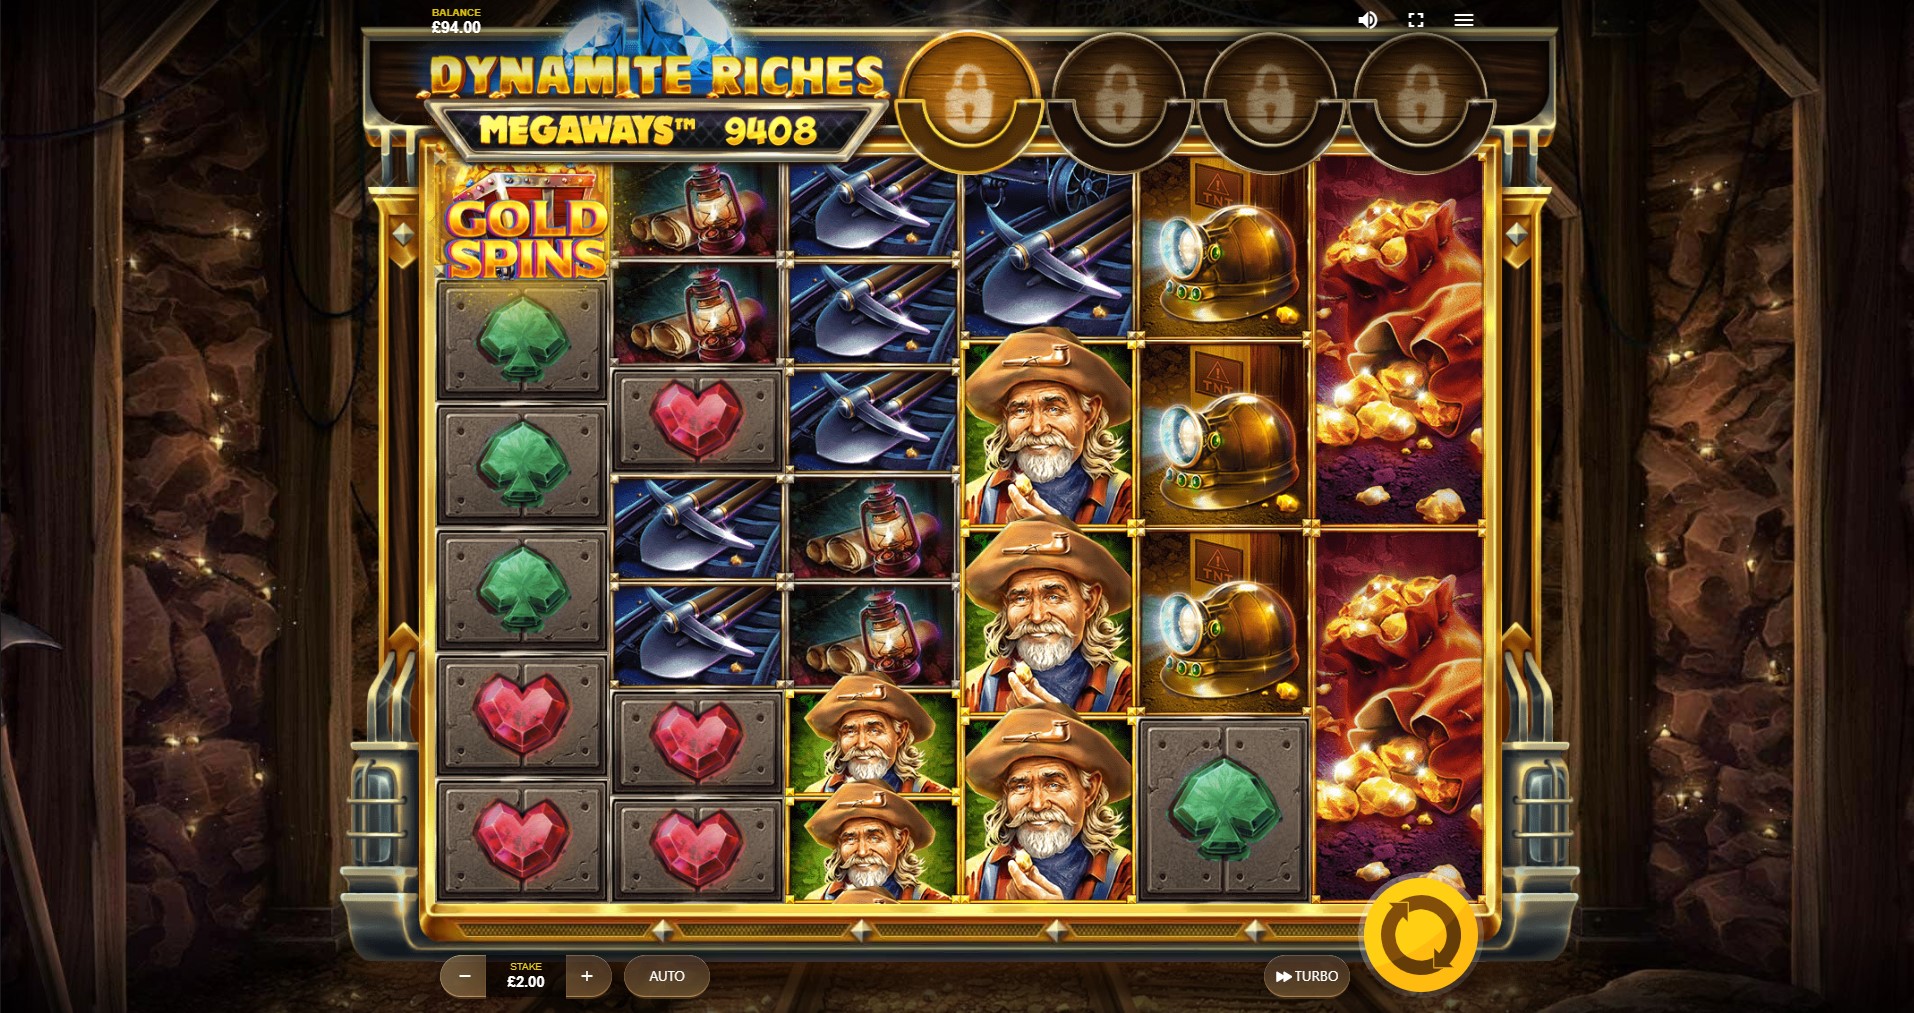 Best online casino sites for Dynamite Riches